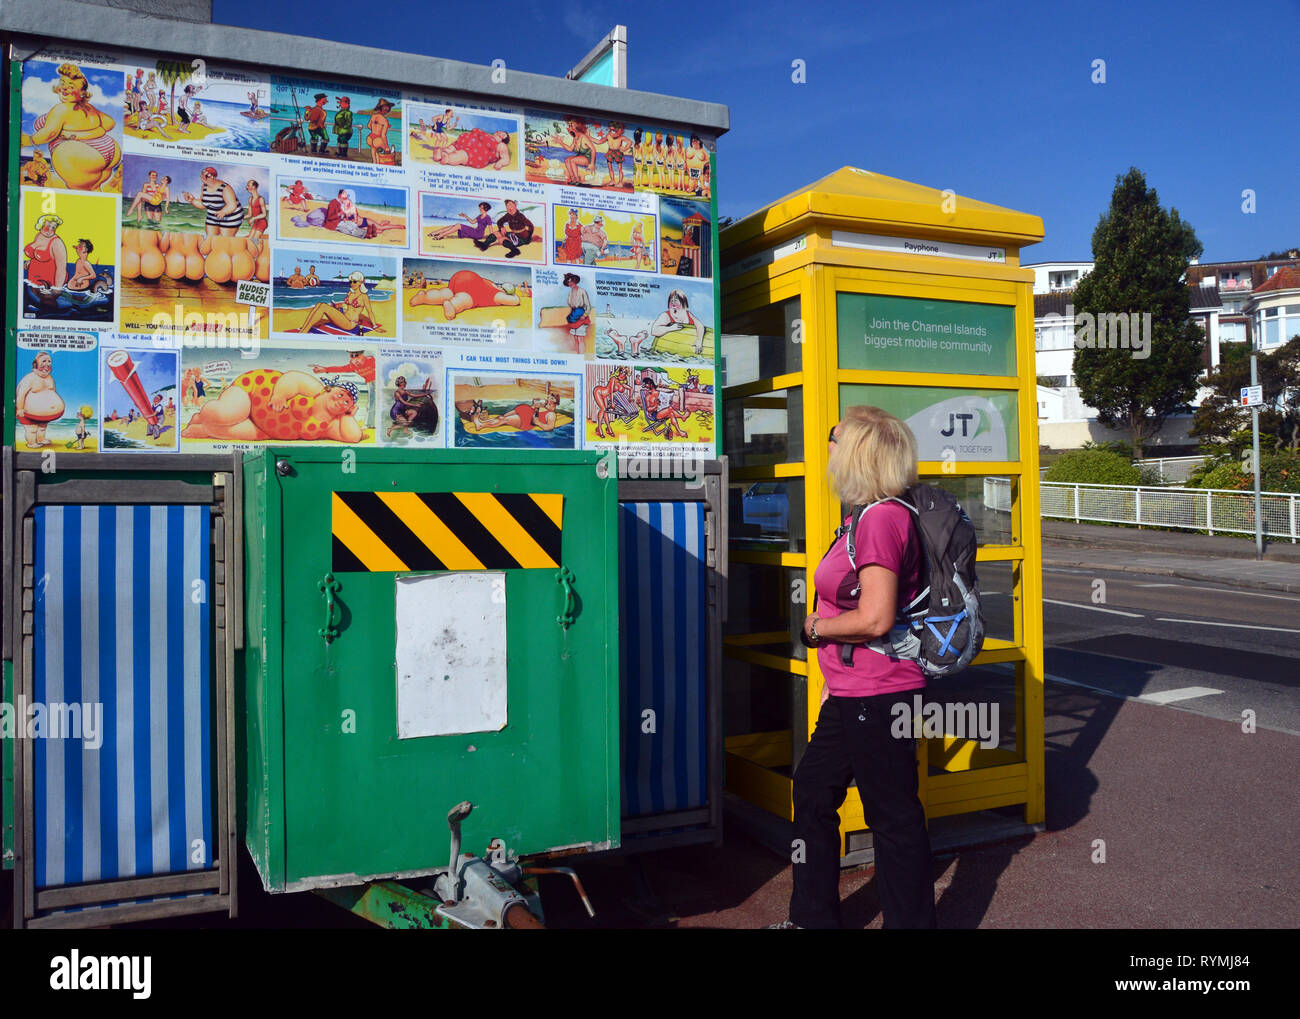 Woman Hiker Looking at Cheeky Postcards on Tea Van next to a Yellow Phone Box near St Helier on the Island of Jersey, Channel Isles, UK. Stock Photo